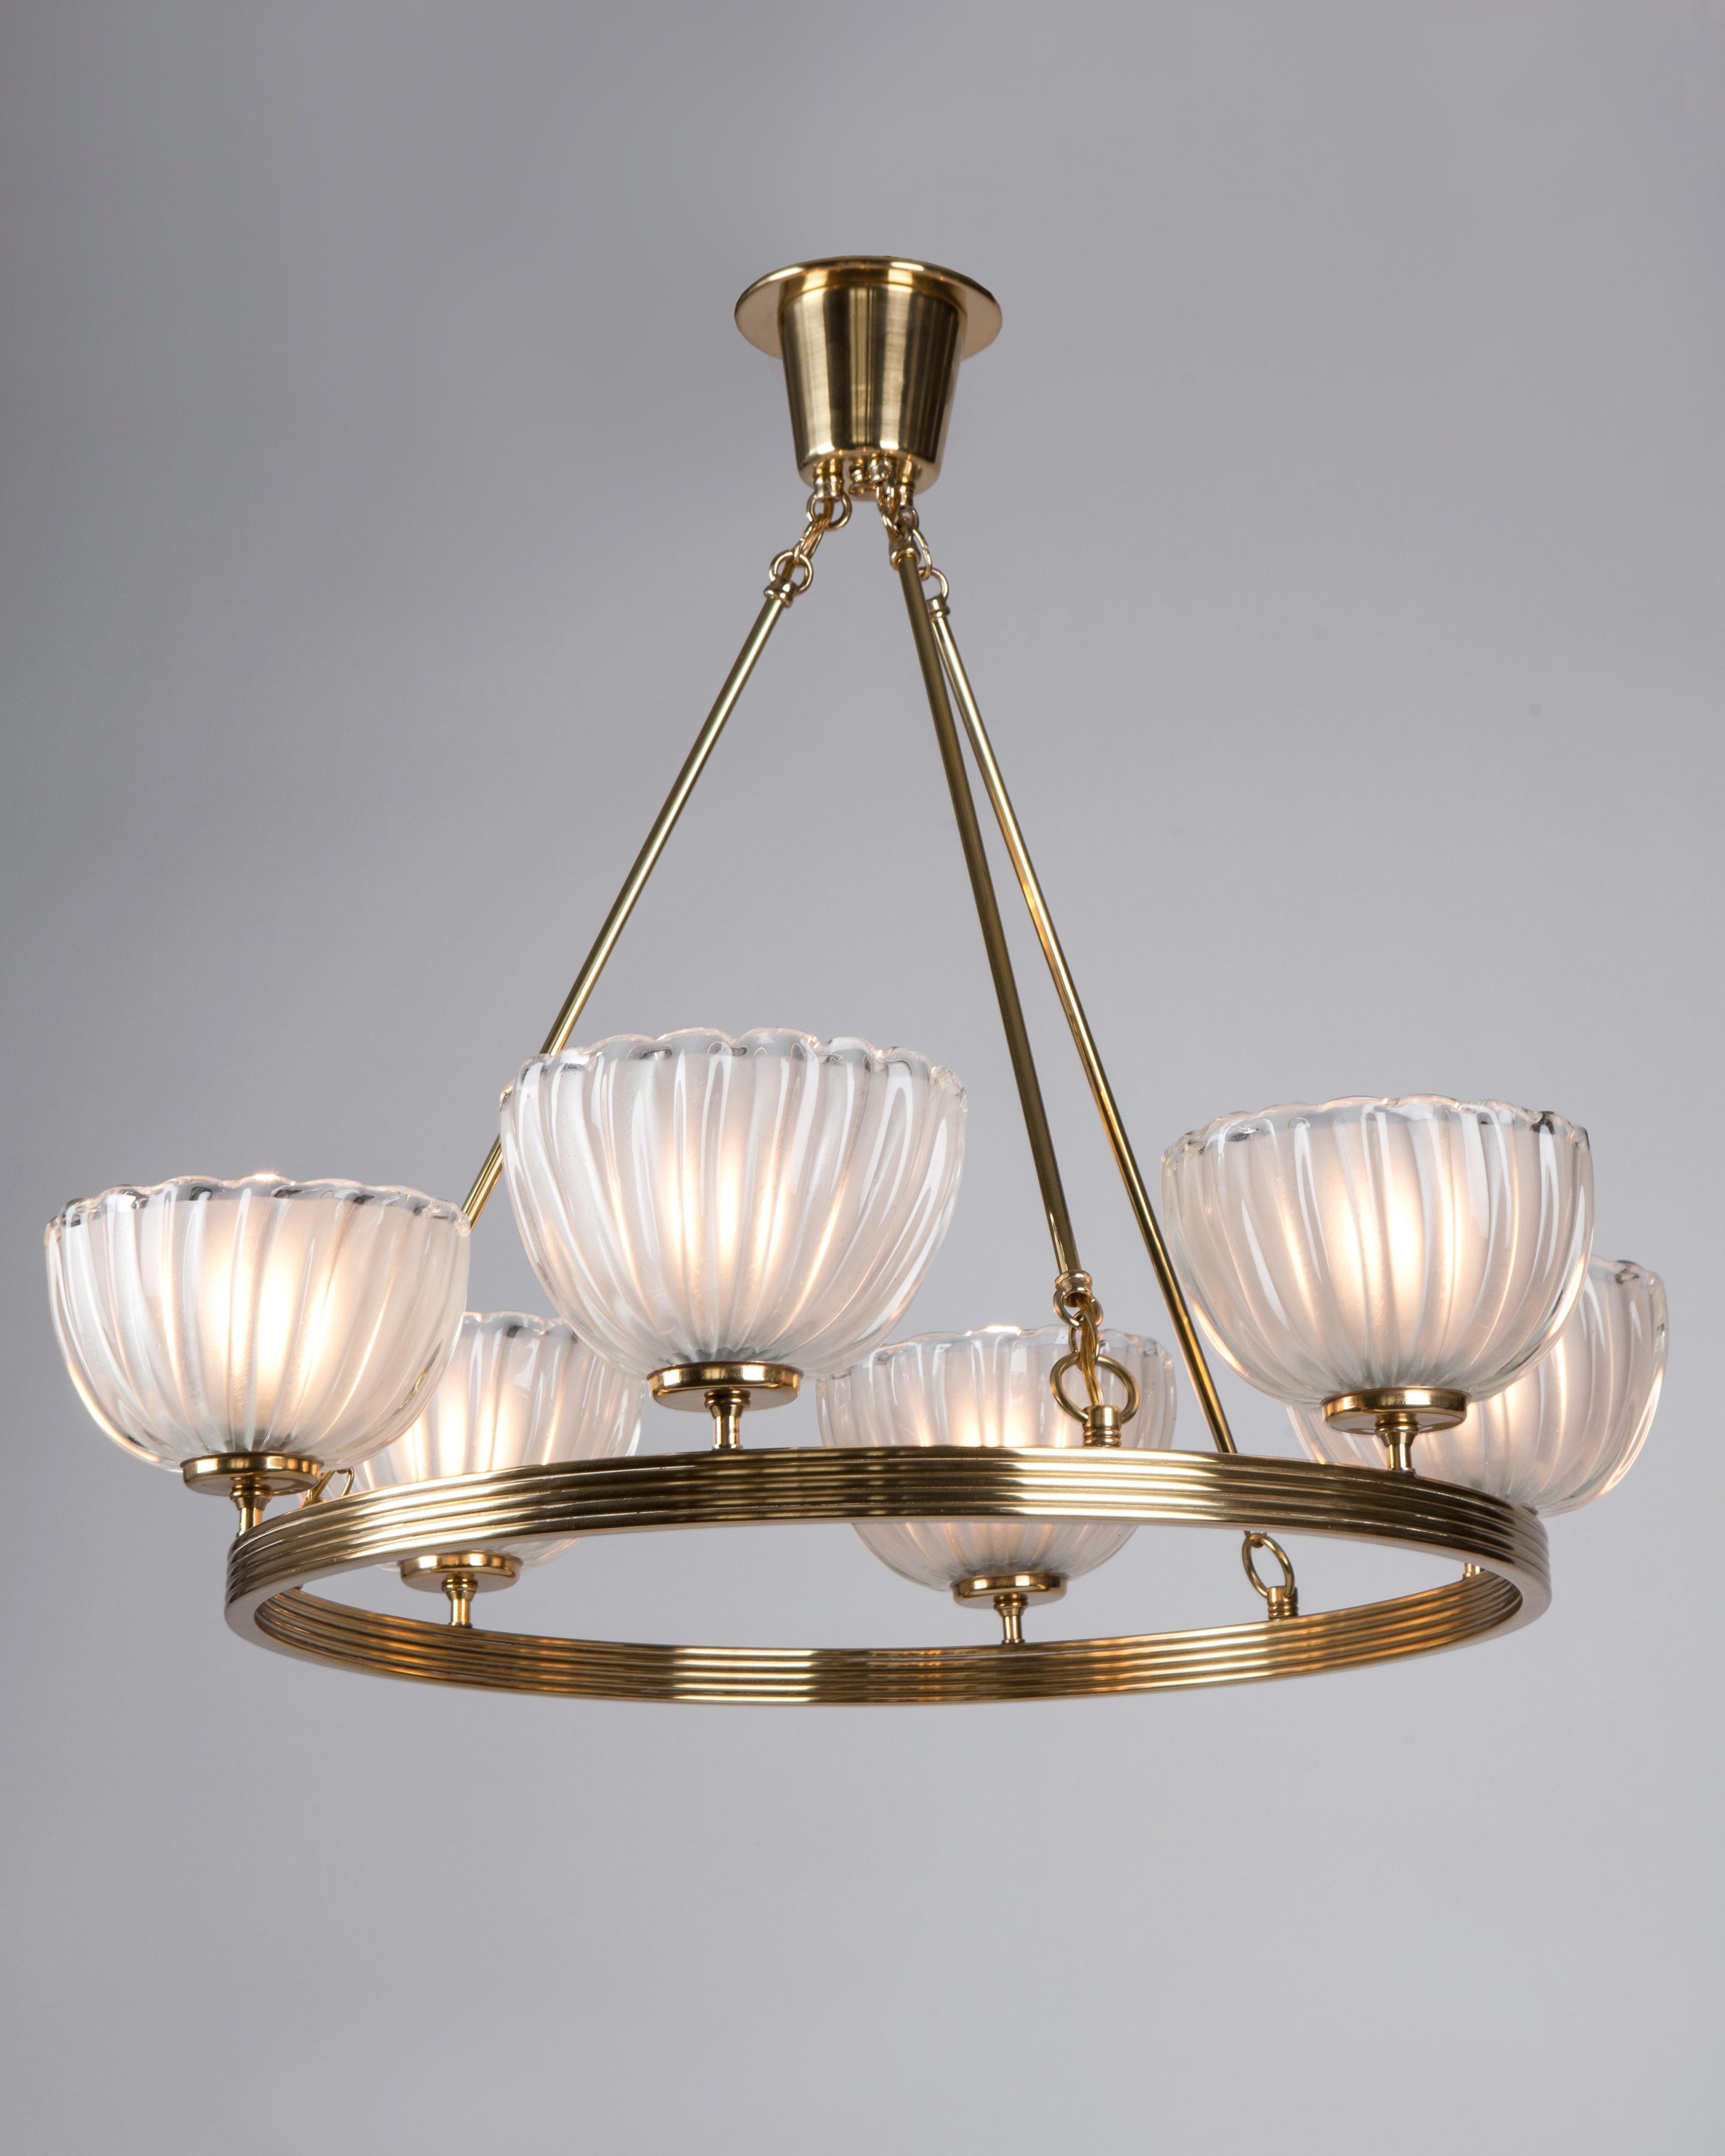 AHL4138
circa 1940
A six-light vintage chandelier comprised of clear glass shades set on a slender reeded hoop. The thick blown glass having deep ribs, each frosted on the interior. Attributed to the Venetian maker Barovier e Toso. Due to the